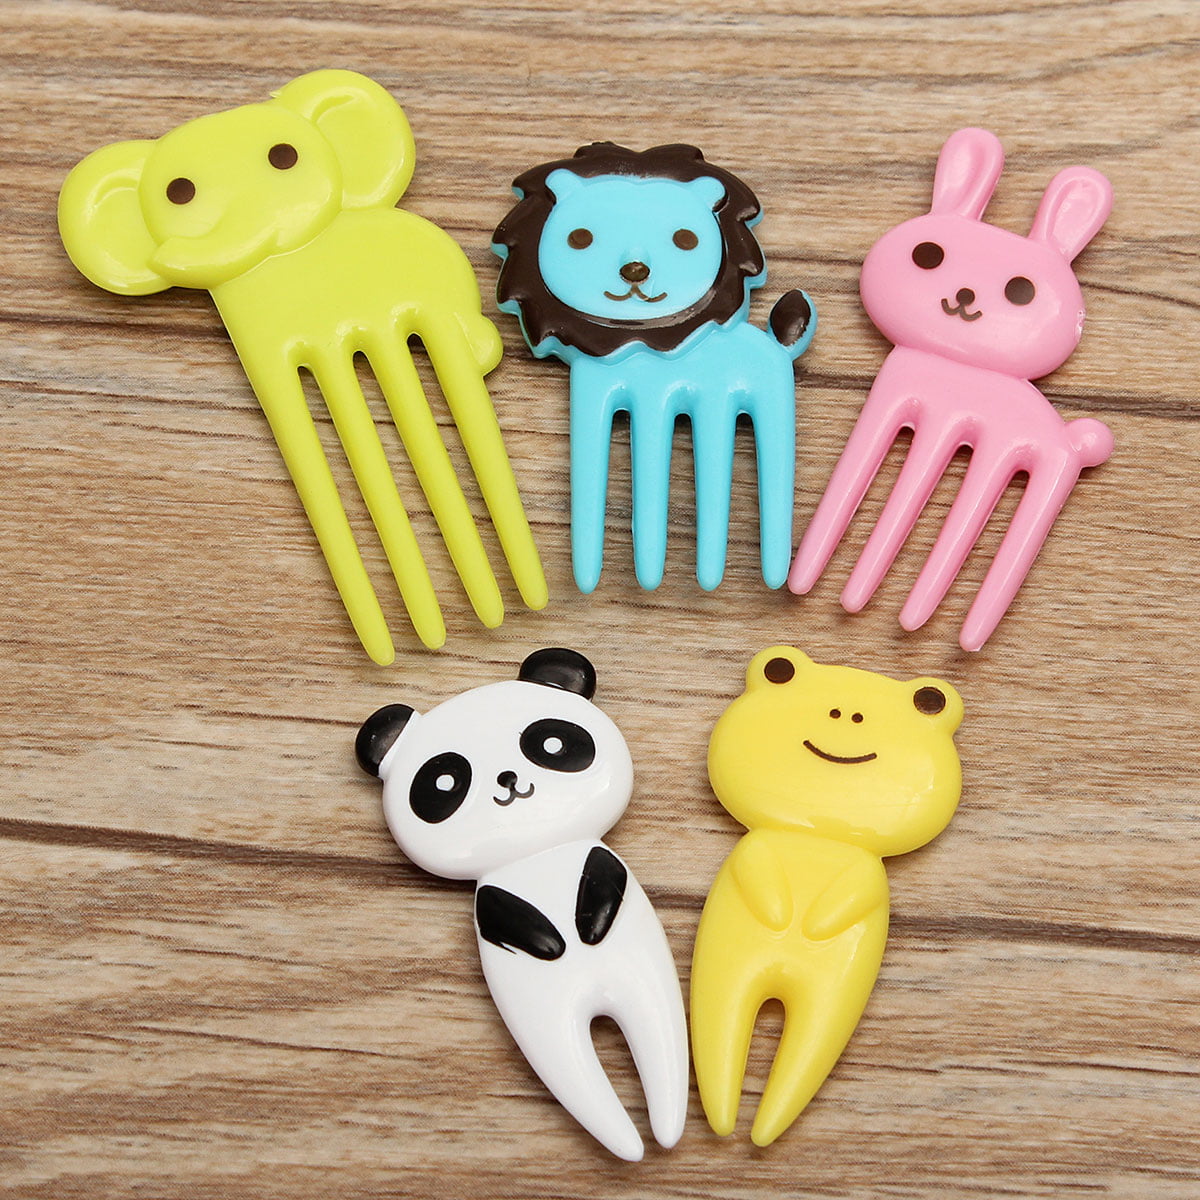 10pcs Bento Cute Animal Food Fruit Picks Forks Lunch Box Accessory Reusable 